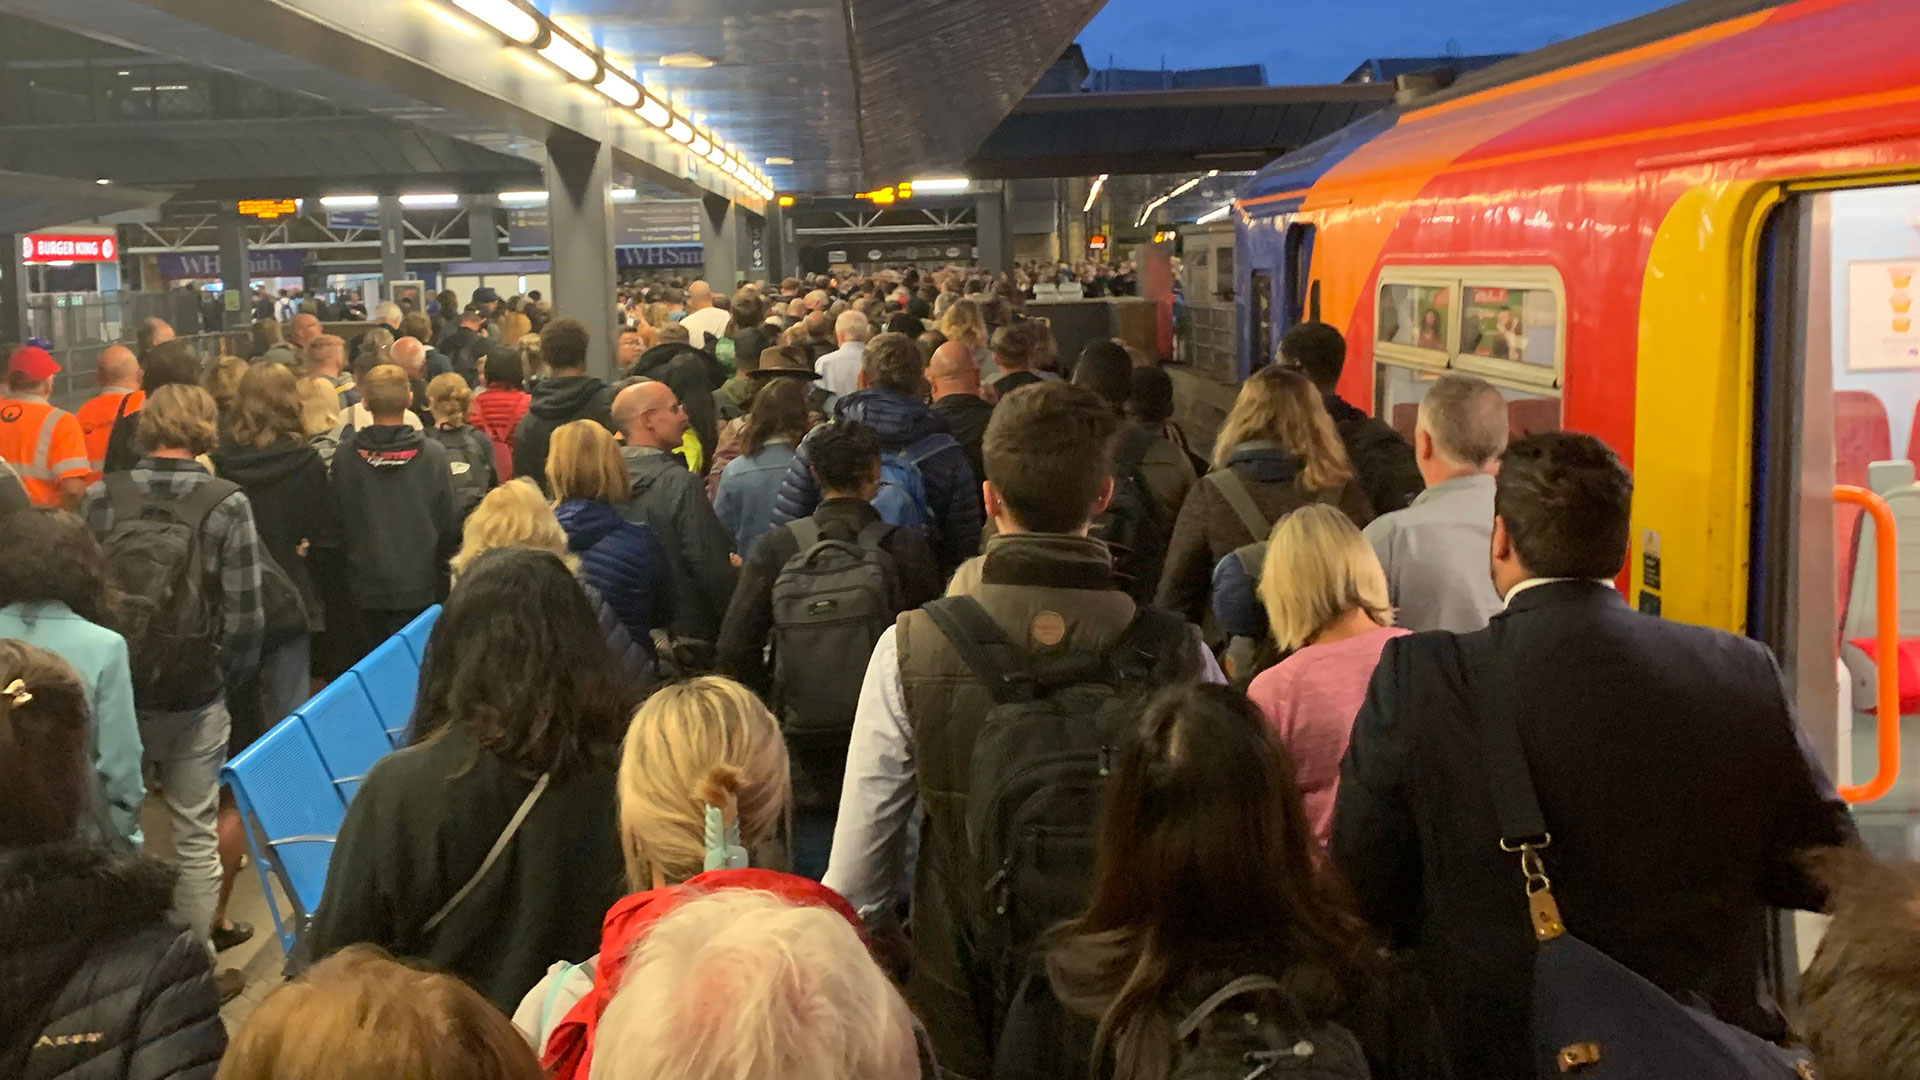 Queen funeral CHAOS as London train line blocked leaving mourners stranded